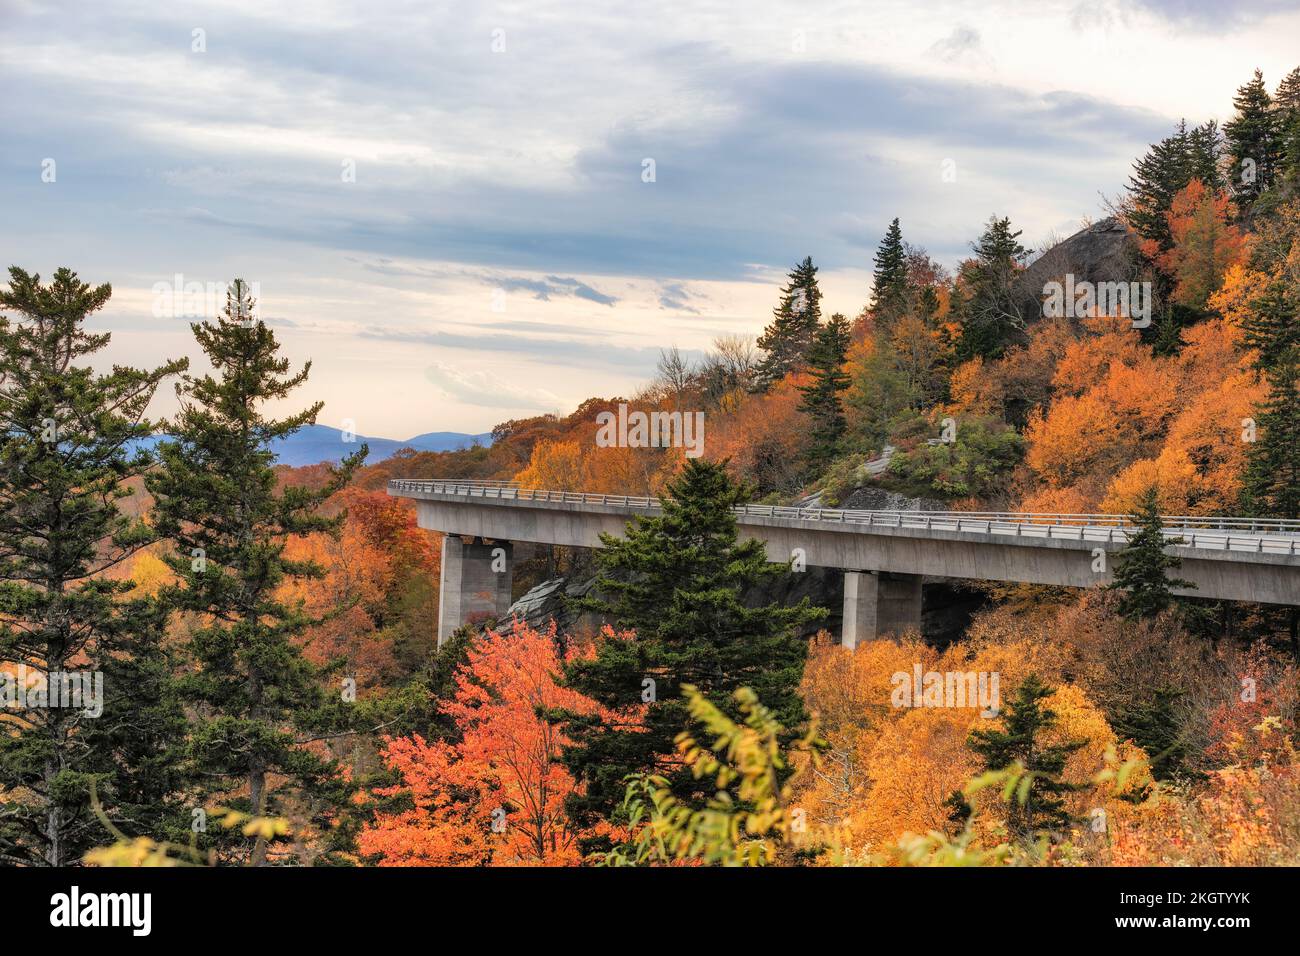 Views of the Linn Cove Viaduct under cloudy skies on the Blue Ridge Parkway in North Carolina Stock Photo